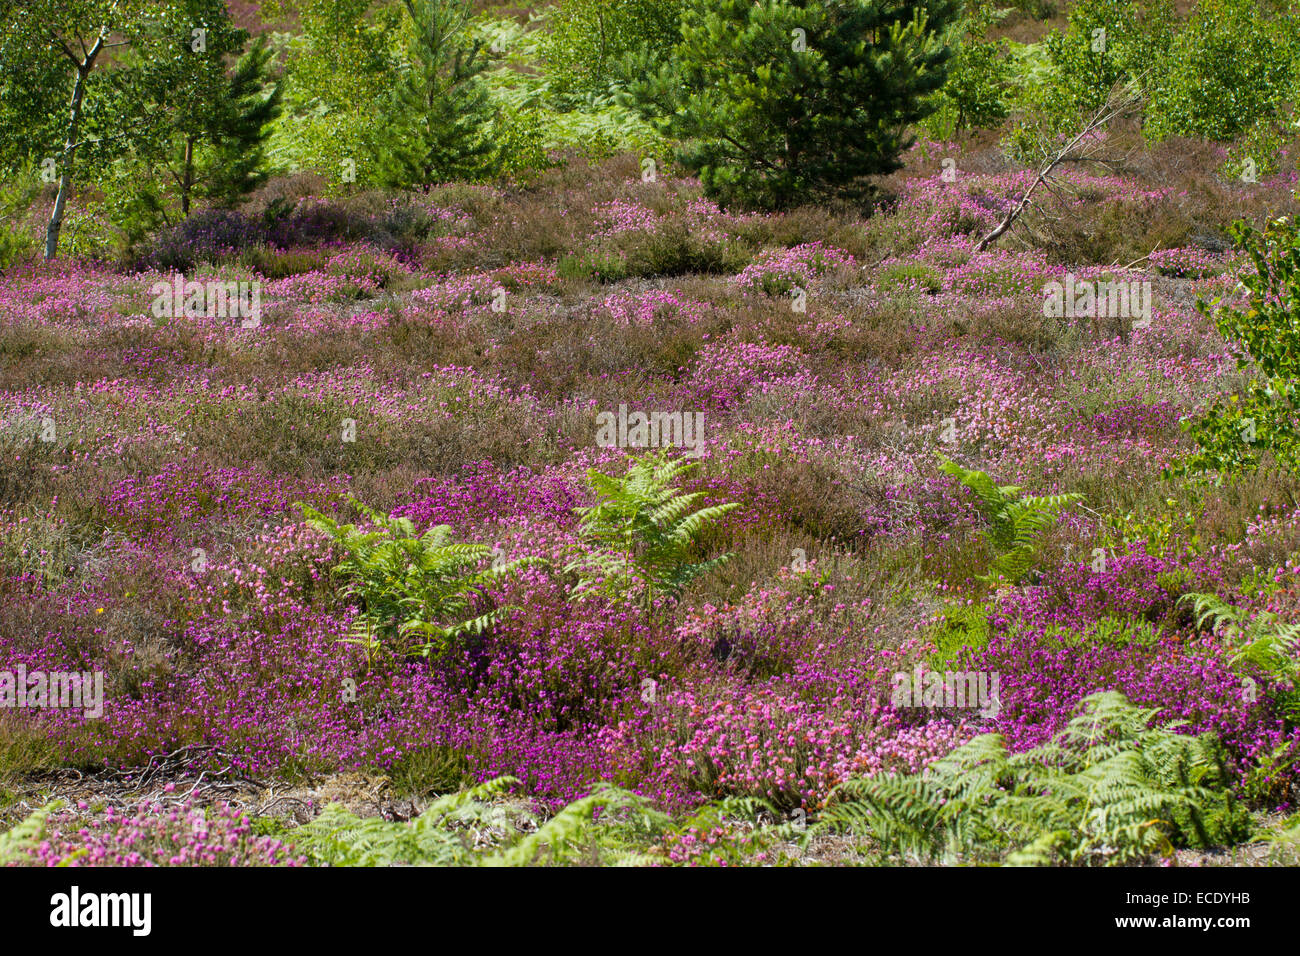 View of heathland habitat with Bell Heather (Erica cinerea) and Cross-leaved Heath (Erica tetralix) in flower, and Scots Pine. Stock Photo